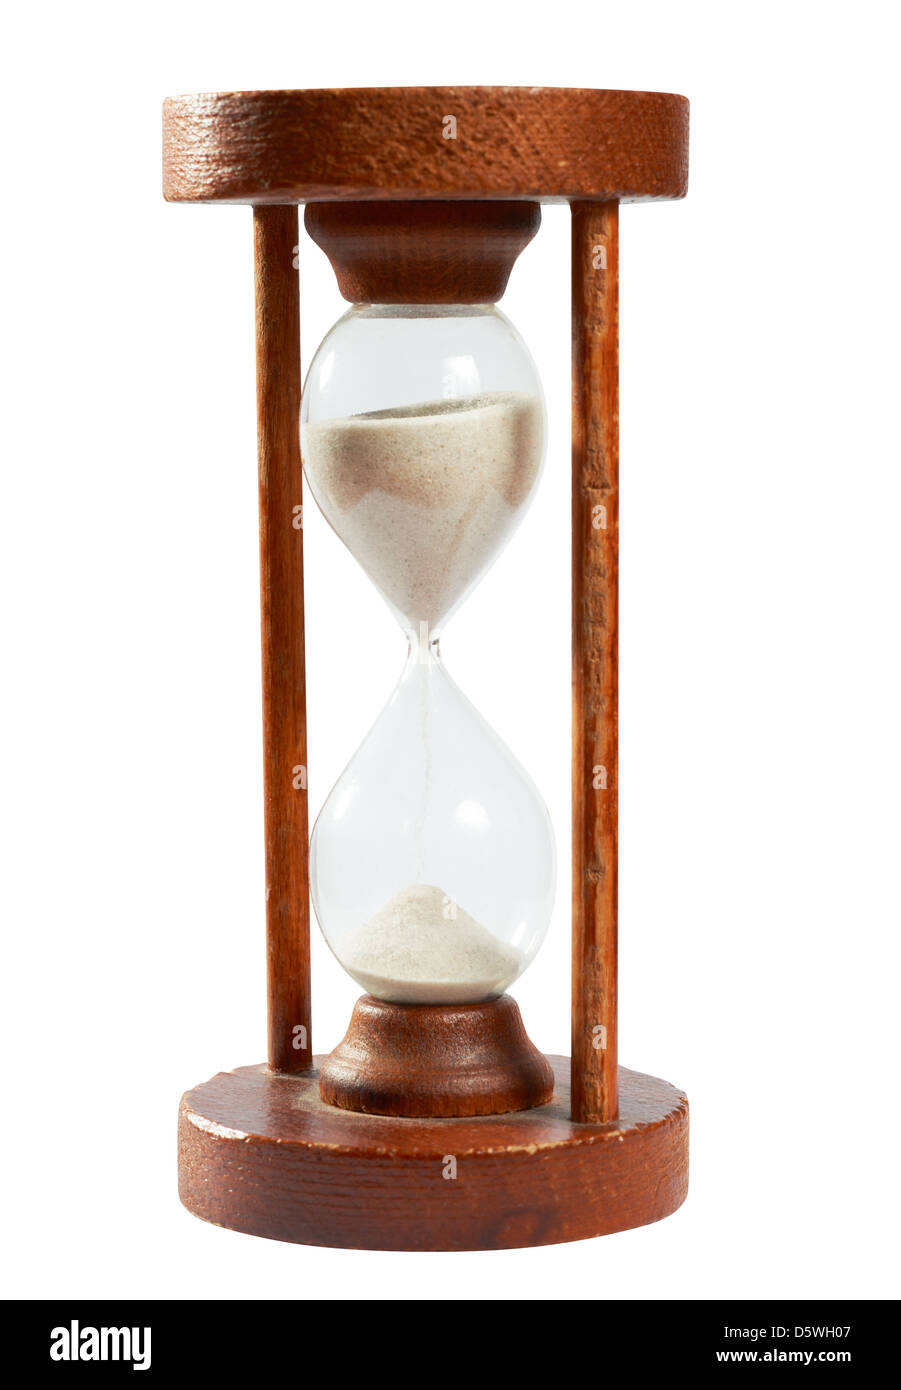 Old hourglass, sand timer from old times to measure time, isolated on white with clipping path included Stock Photo